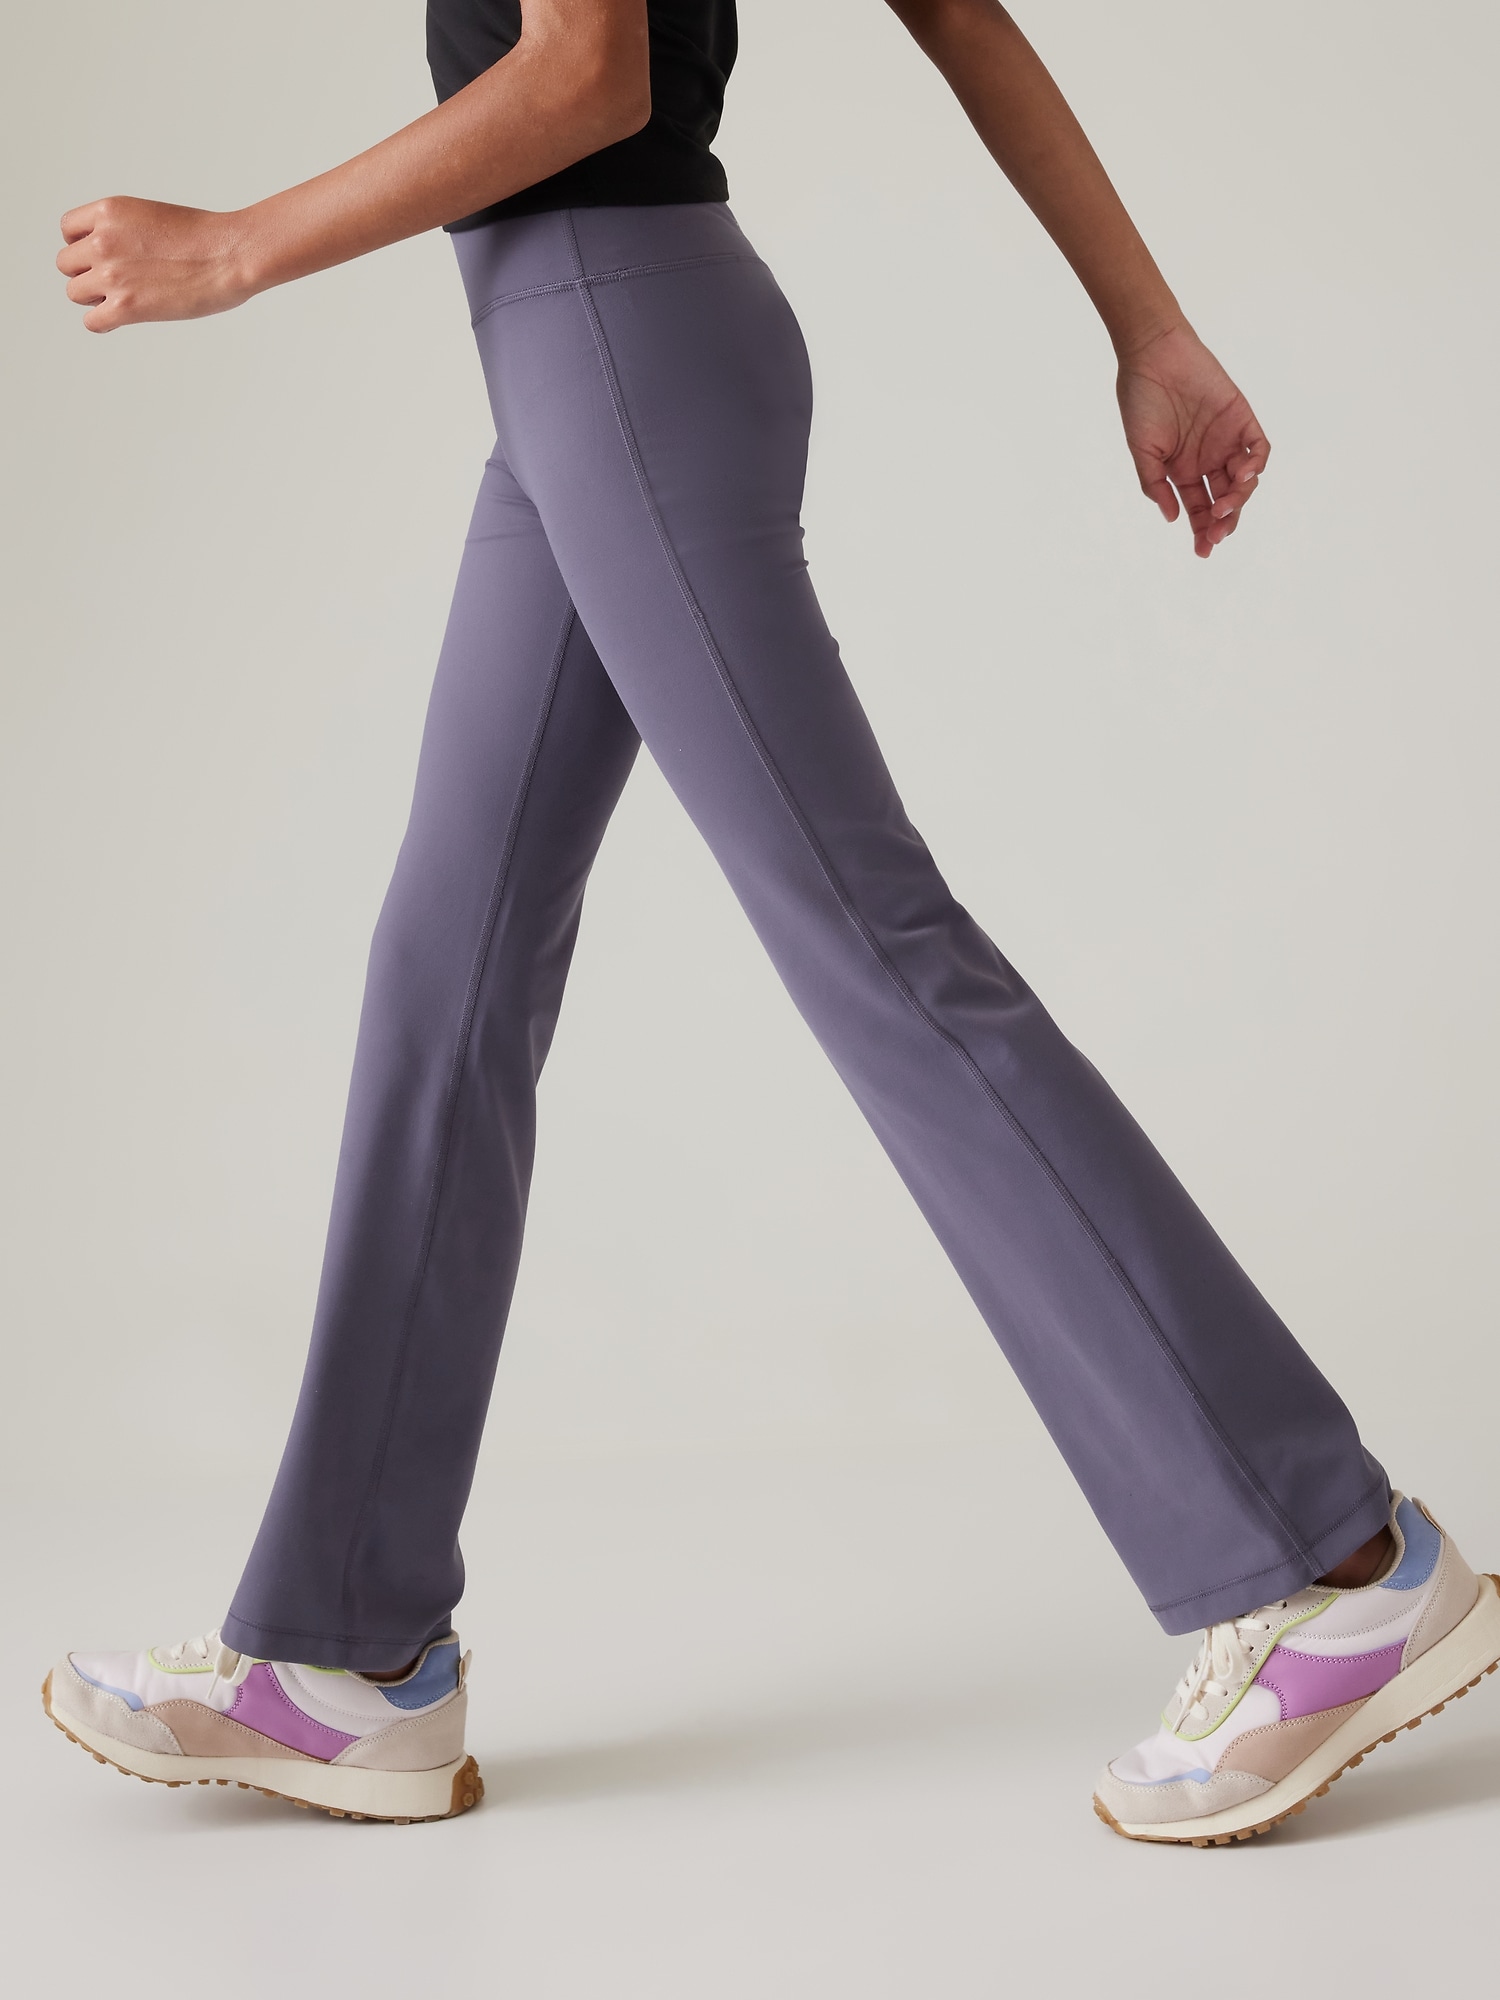 Athleta Girl High Rise Chit Chat Flare Pant purple - 986583043